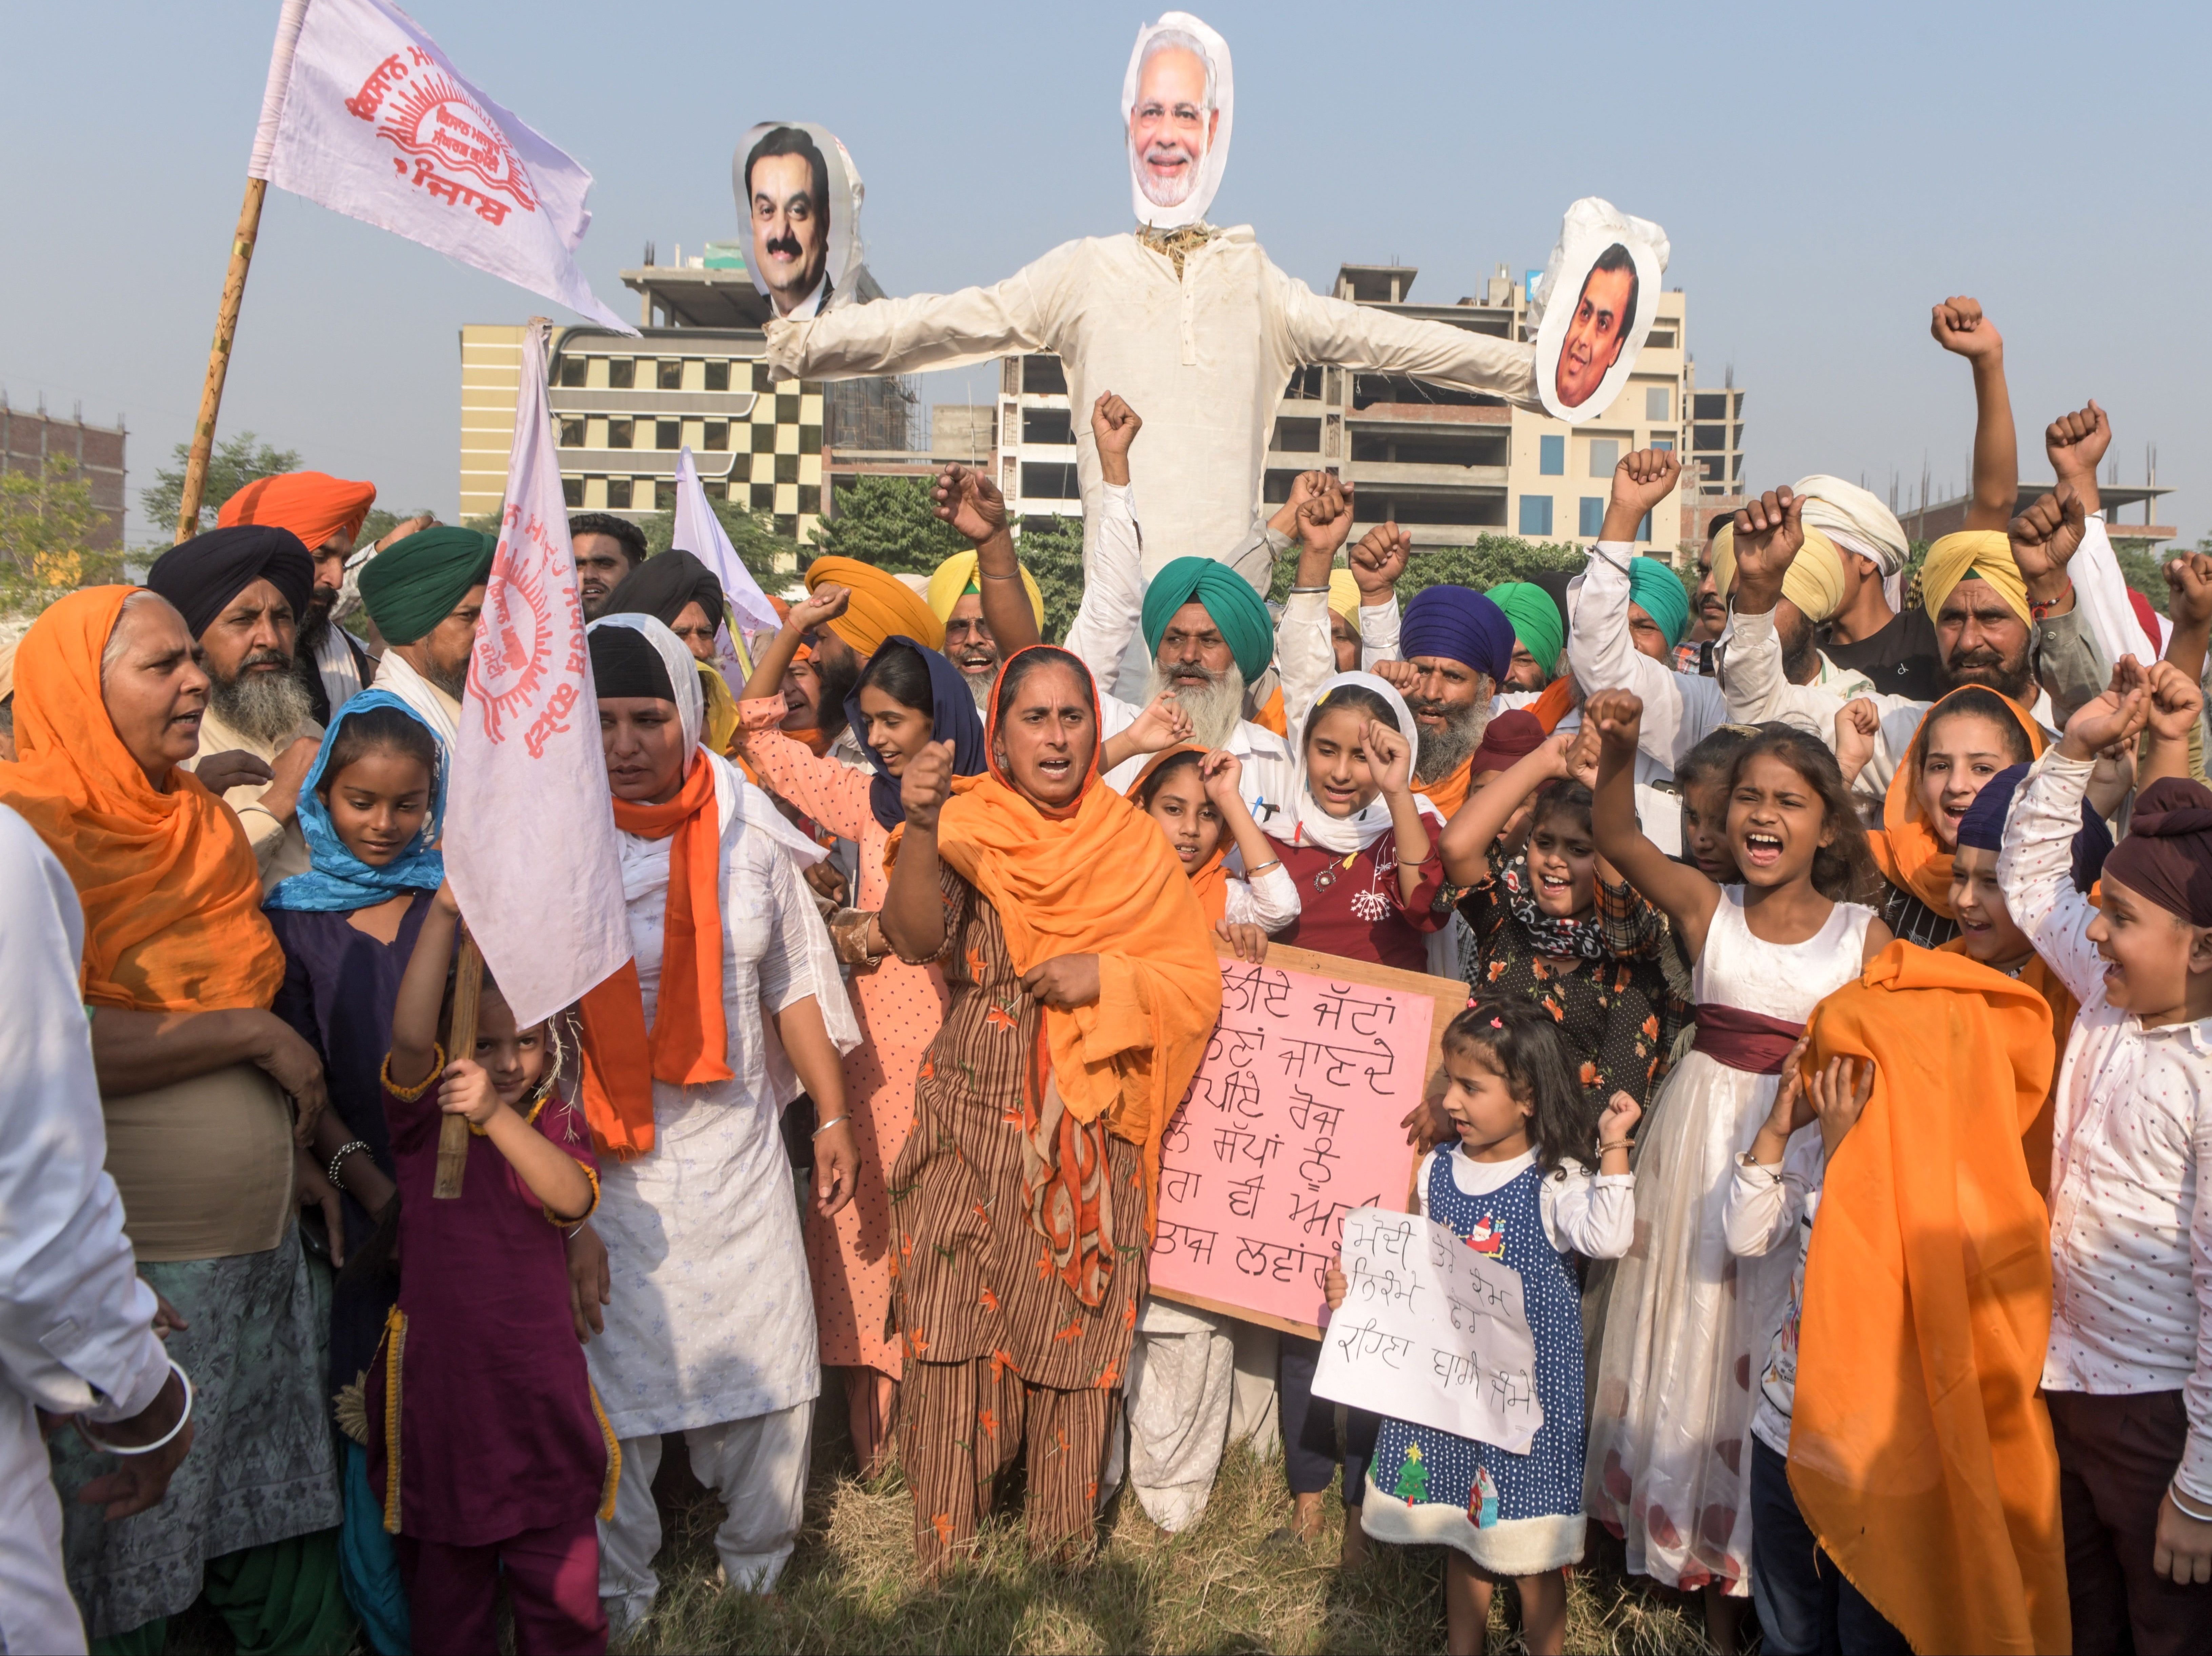 Punjab’s farmers burn an effigy of prime minister Narendra Modi as part of protests against new agricultural reforms